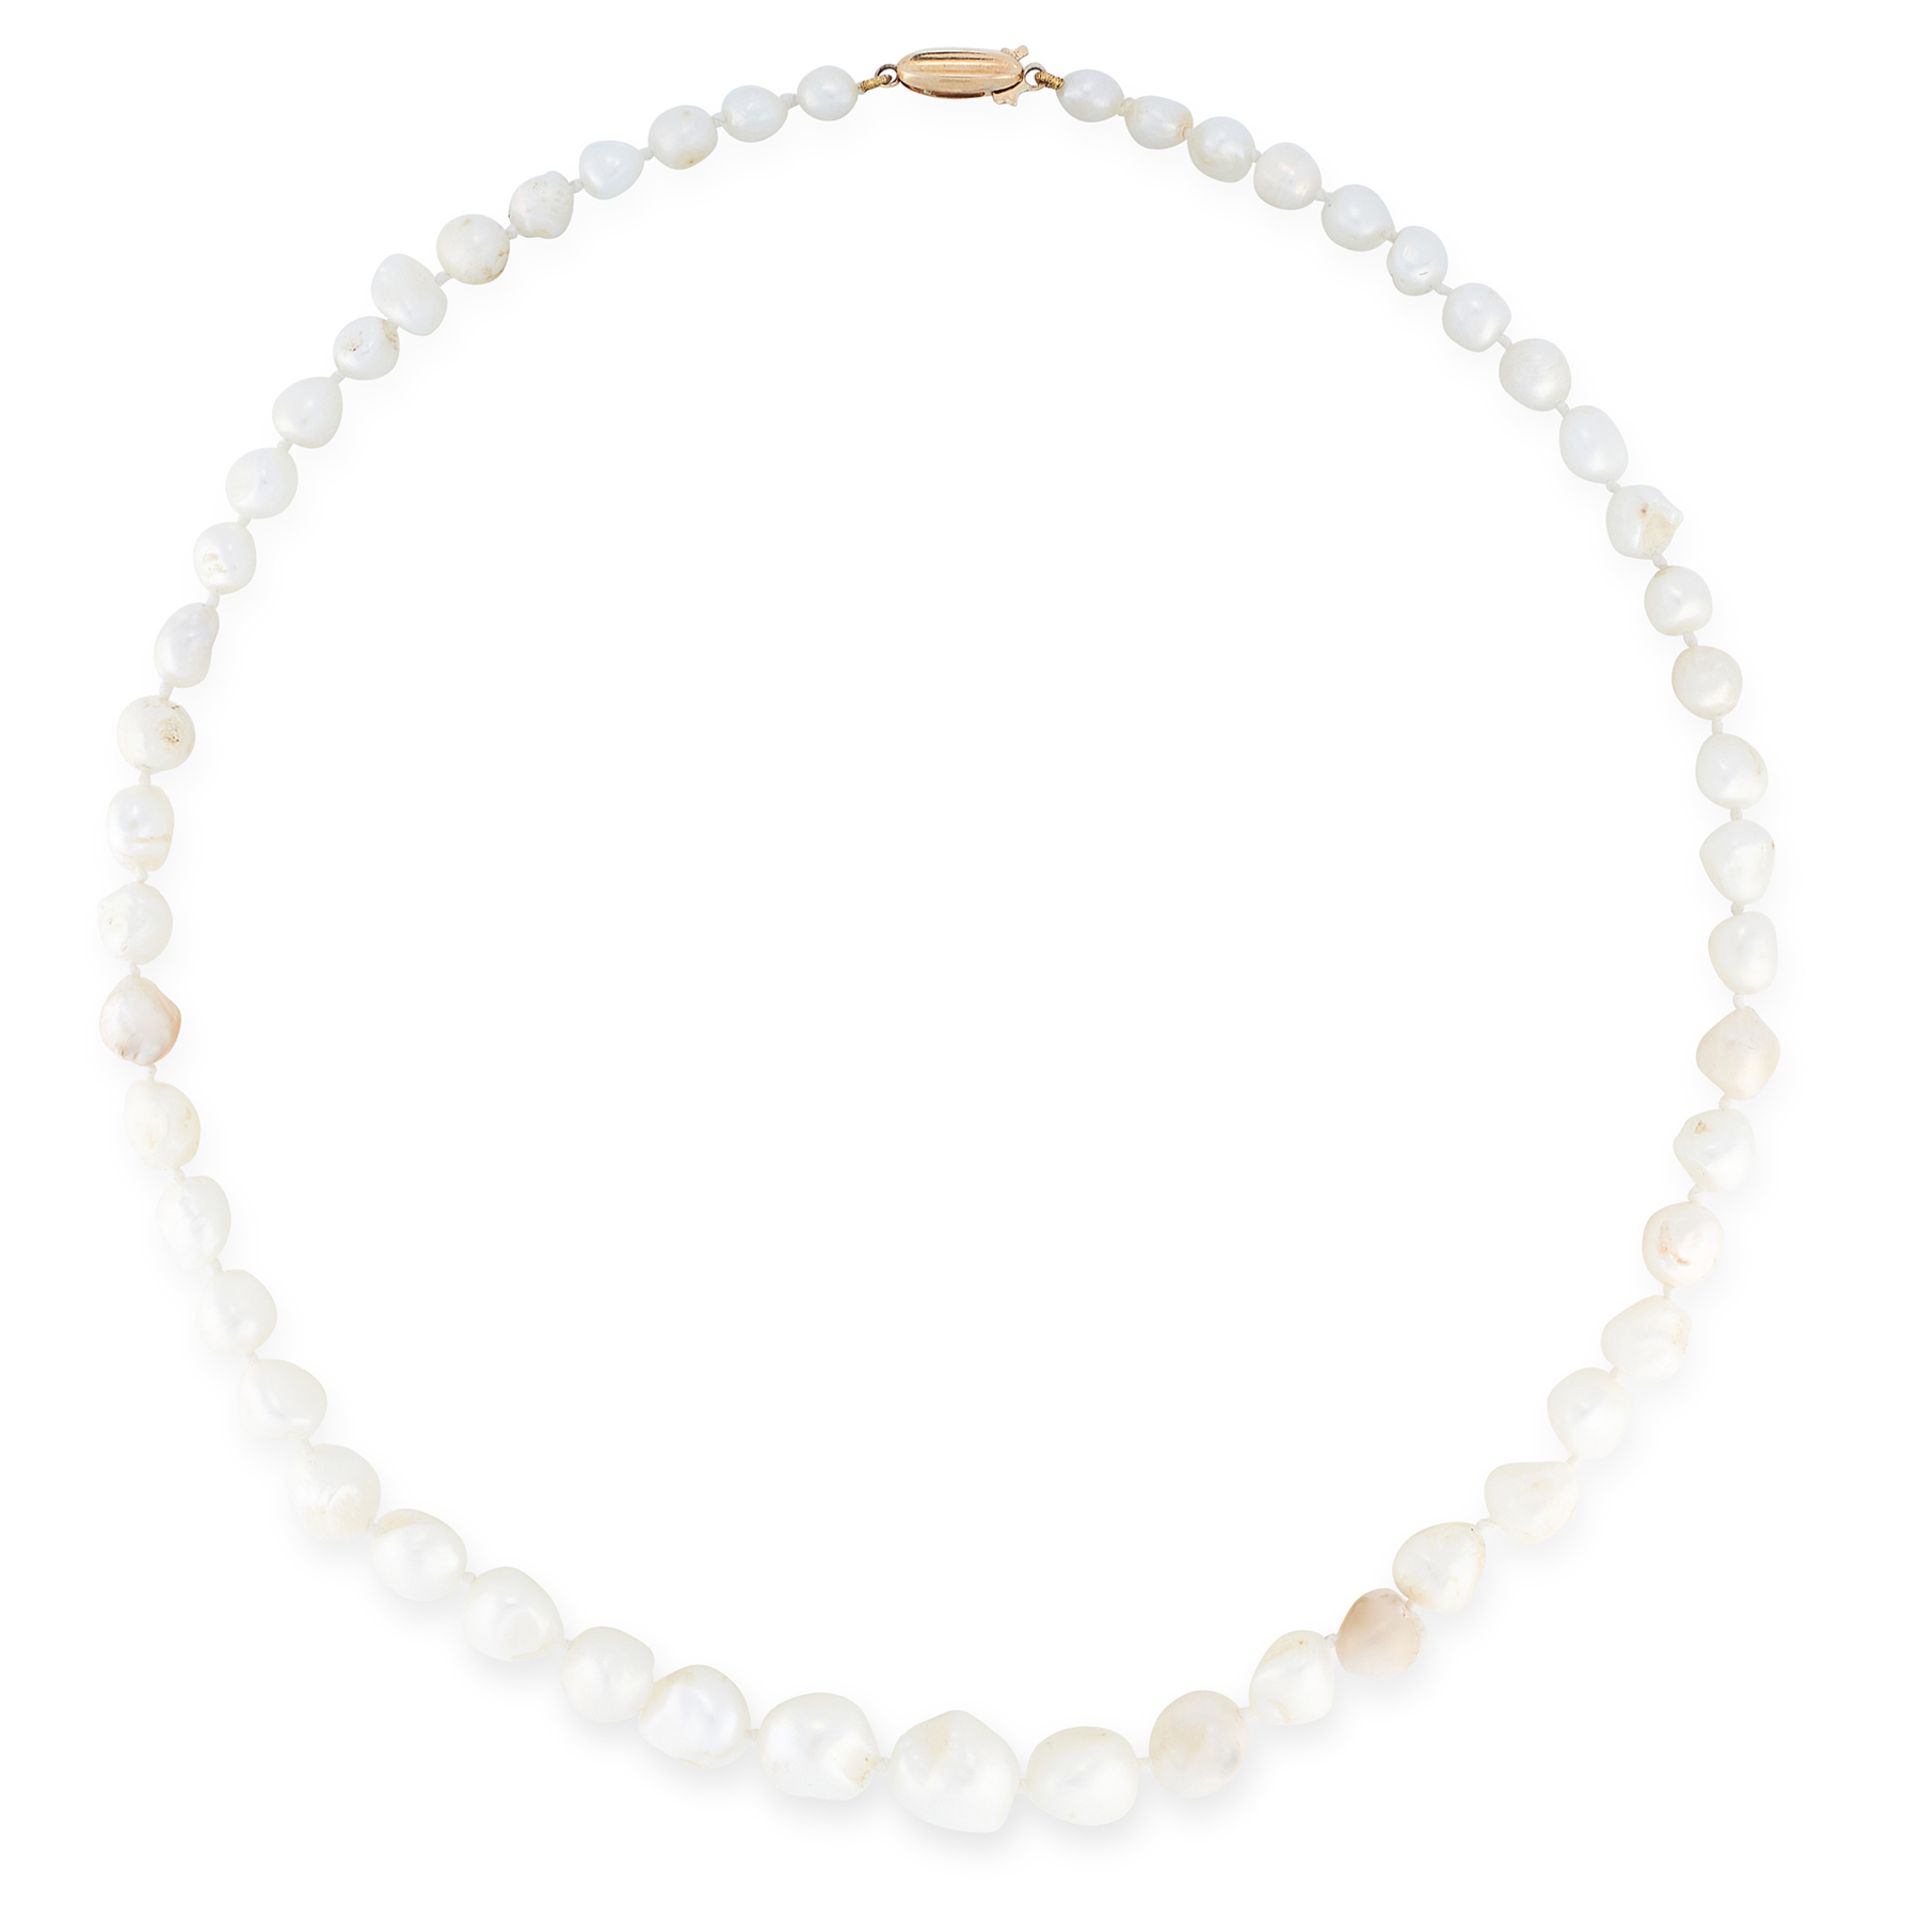 A PEARL NECKLACE comprising a single row of graduated baroque pearls, set on a gold clasp, marked